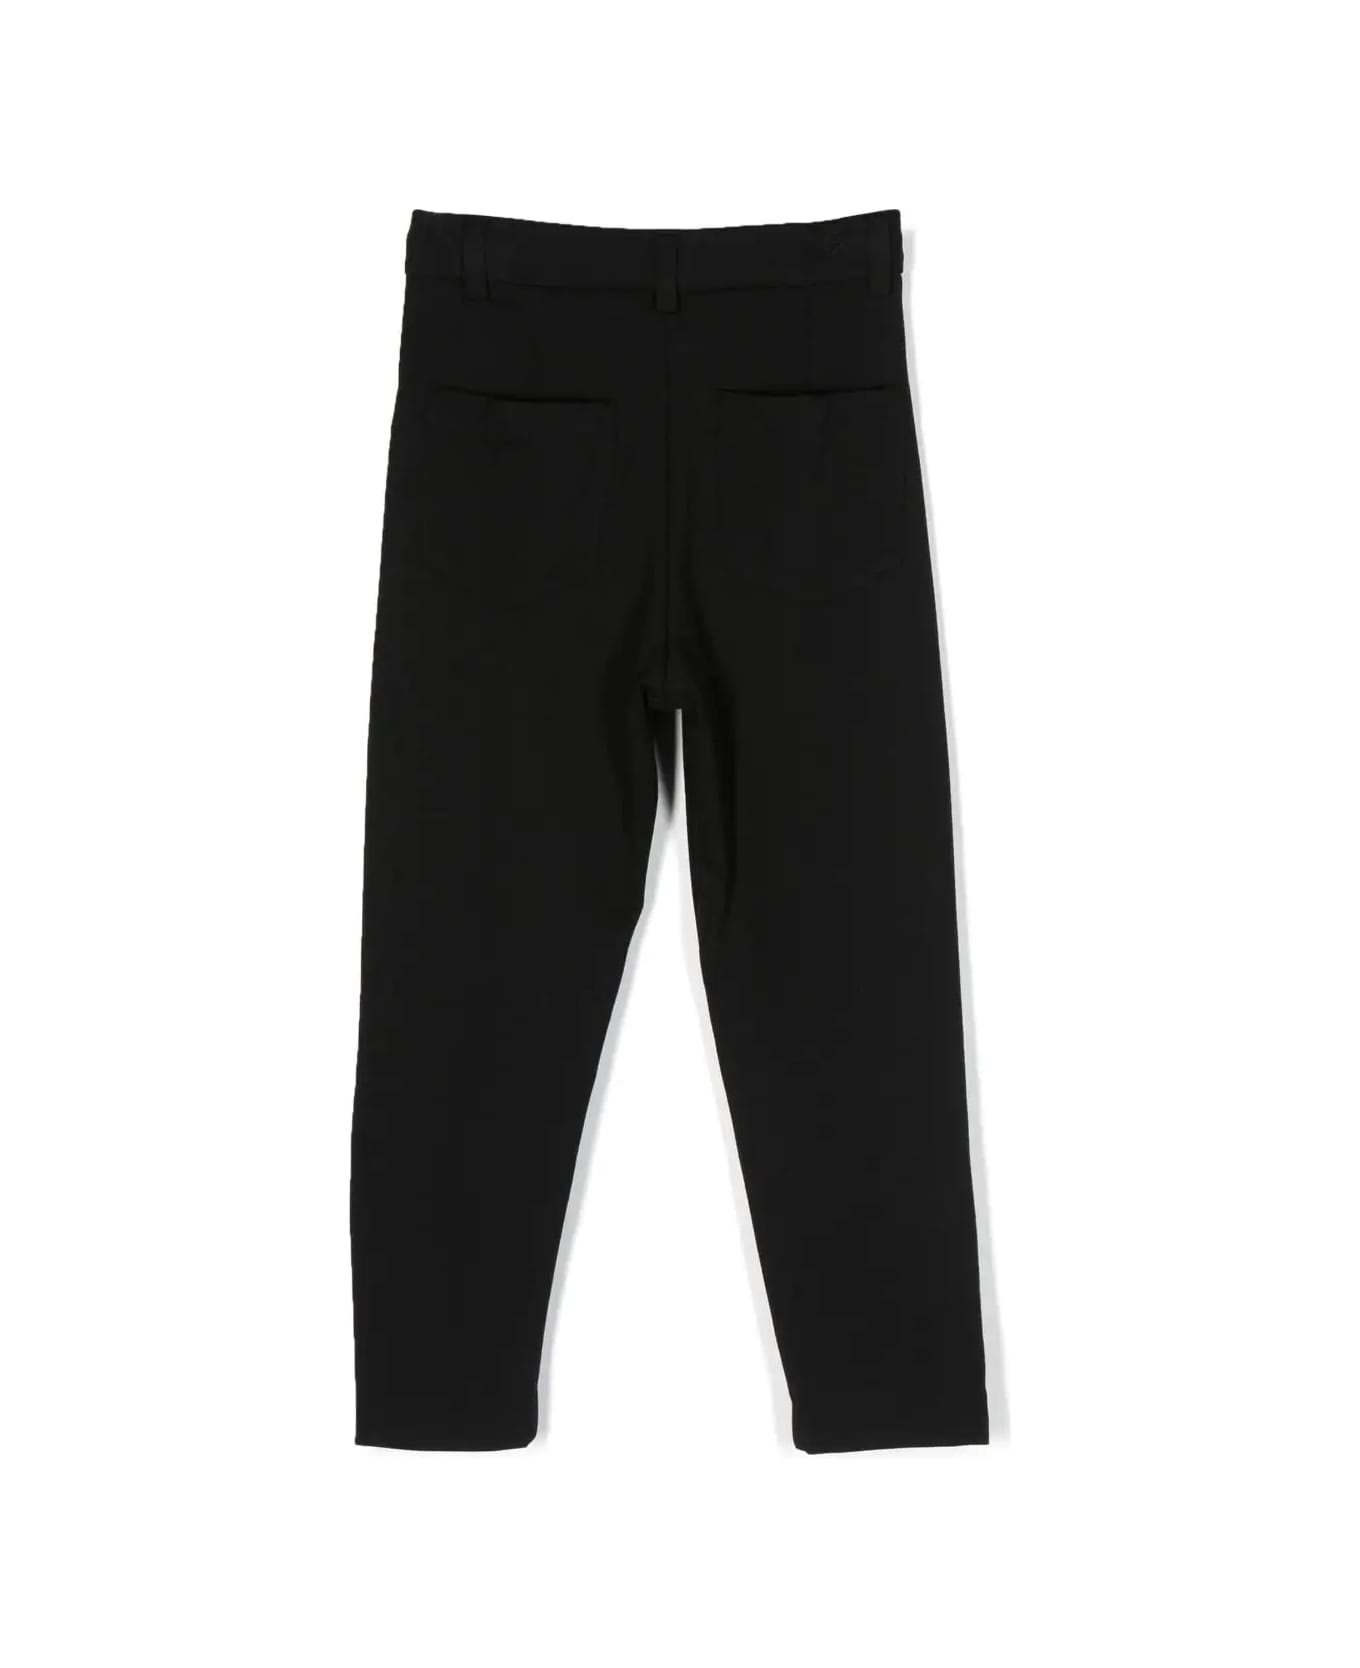 Balmain Black High Waist Pants With Gold Embossed Buttons - black ボトムス